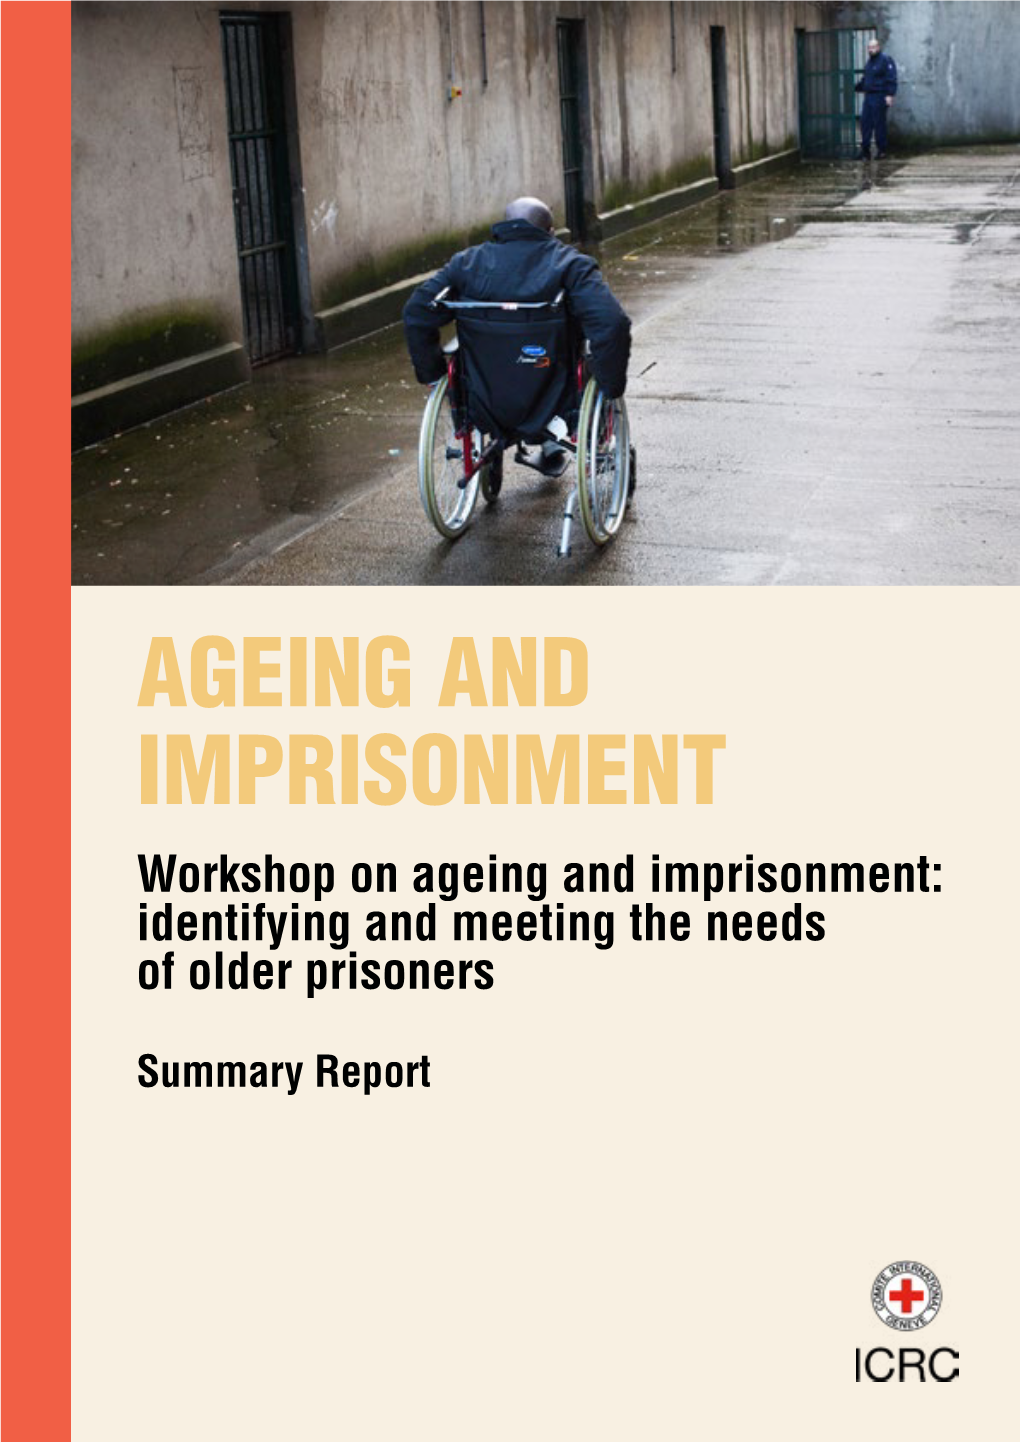 Ageing and Imprisonment: Identifying and Meeting the Needs of Older Prisoners